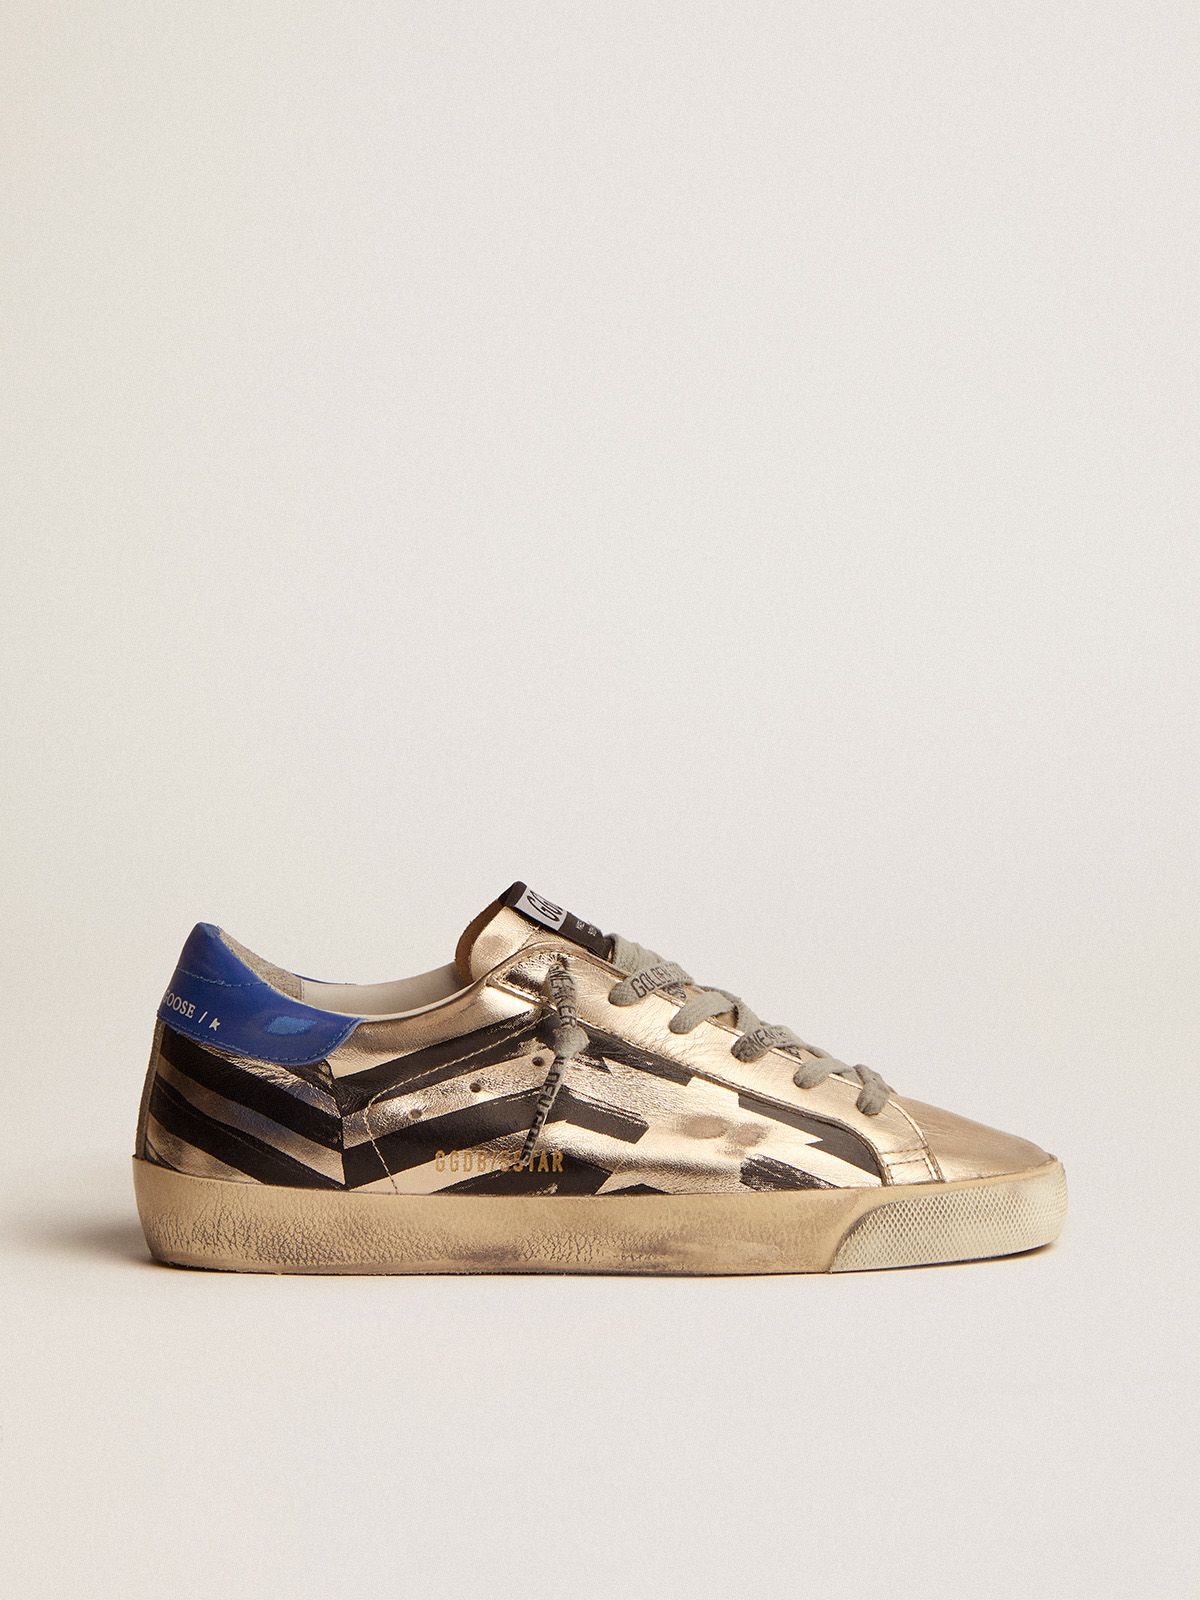 Sneakers Uomo Golden Goose Super-Star sneakers in platinum-colored laminated leather with black flag print and red and blue heel tab